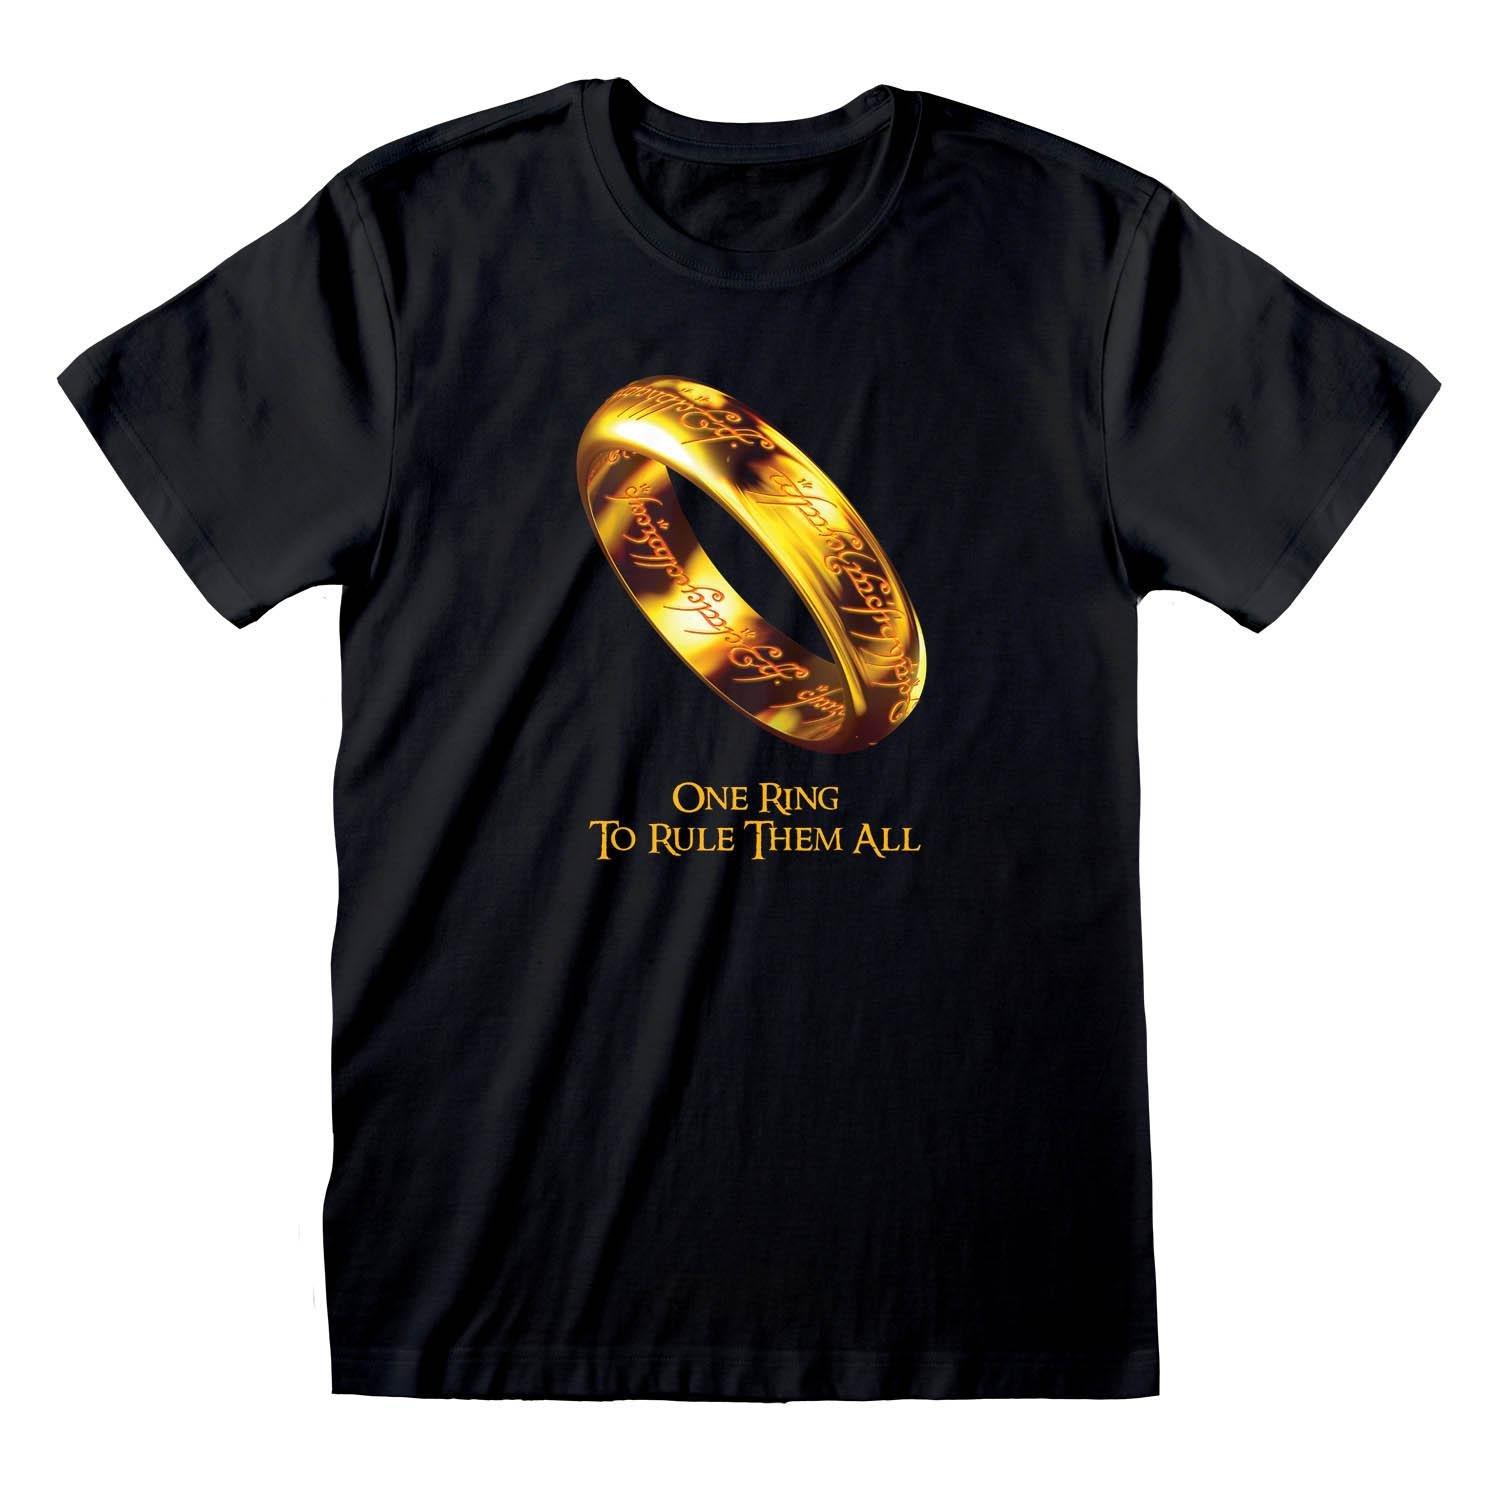 One Ring To Rule Them All Tshirt Damen Schwarz M von Lord Of The Rings